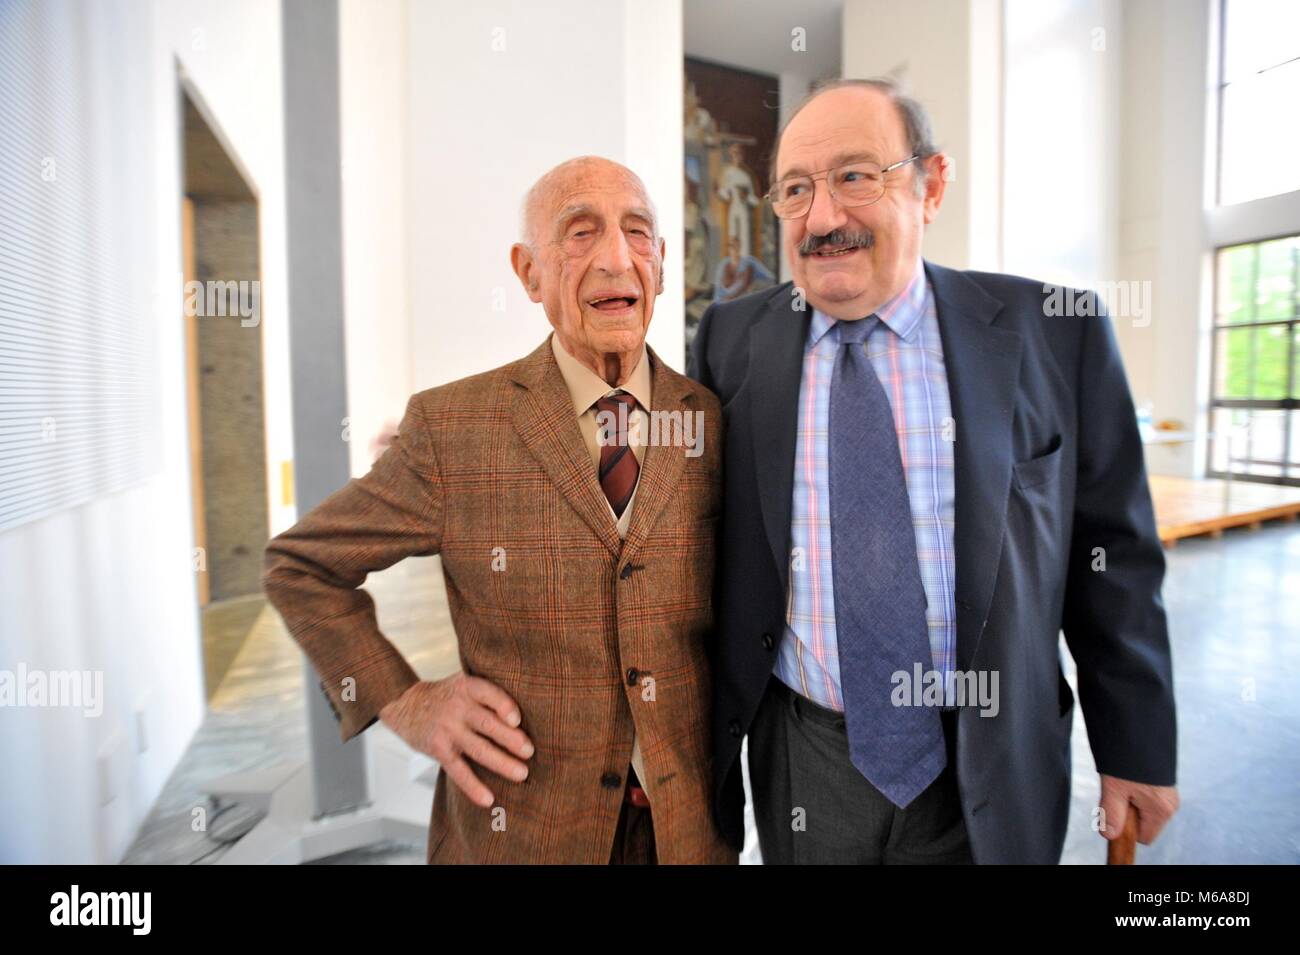 PRESENTATION OF THE BOOK 'GILLO DORFLES, ART AND COMMUNICATION' TO THE THREE-YEARS, WITH GILLO DORFLES AND UMBERTO ECO (Duilio Piaggesi, MILAN - 2009-04-06) ps the photo can be used respecting the context in which it was taken, and without the defamatory intent of the decoration of the people represented (Duilio Piaggesi, FOTO ARCHIVIO - 2018-03-02) ps the photo can be used respecting the context in which it was taken, and without the defamatory intent of the decoration of the people represented Stock Photo